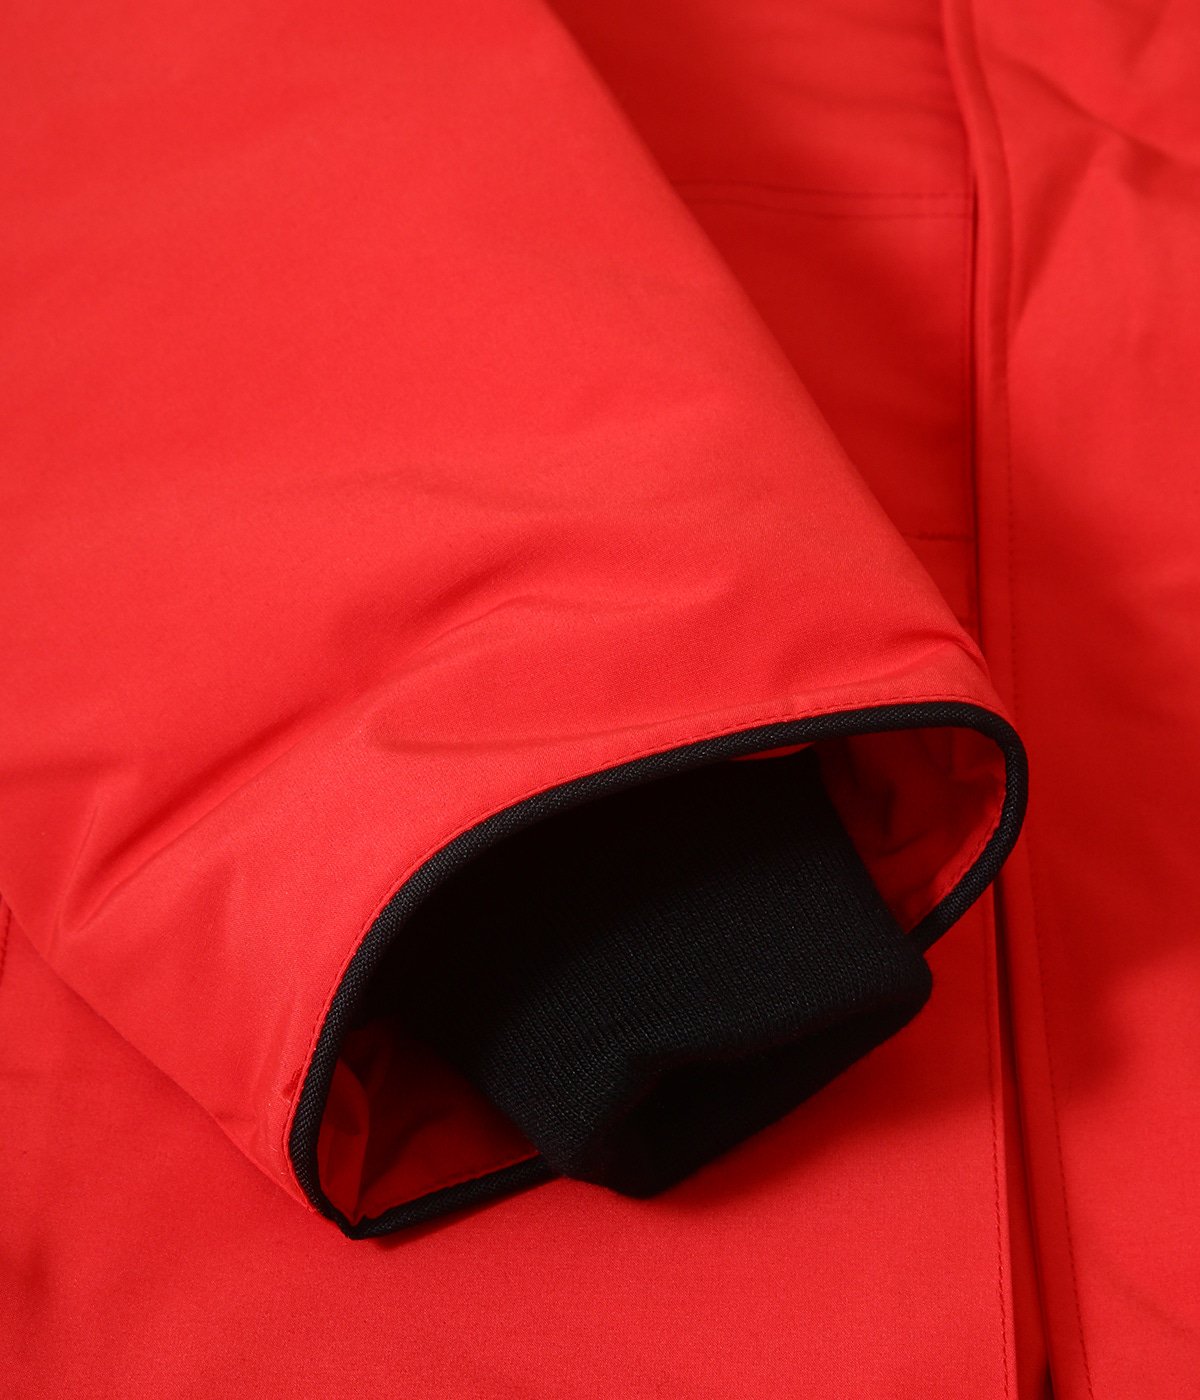 EXPEDITION PARKA FF -RED- (エクスペディション パーカ)